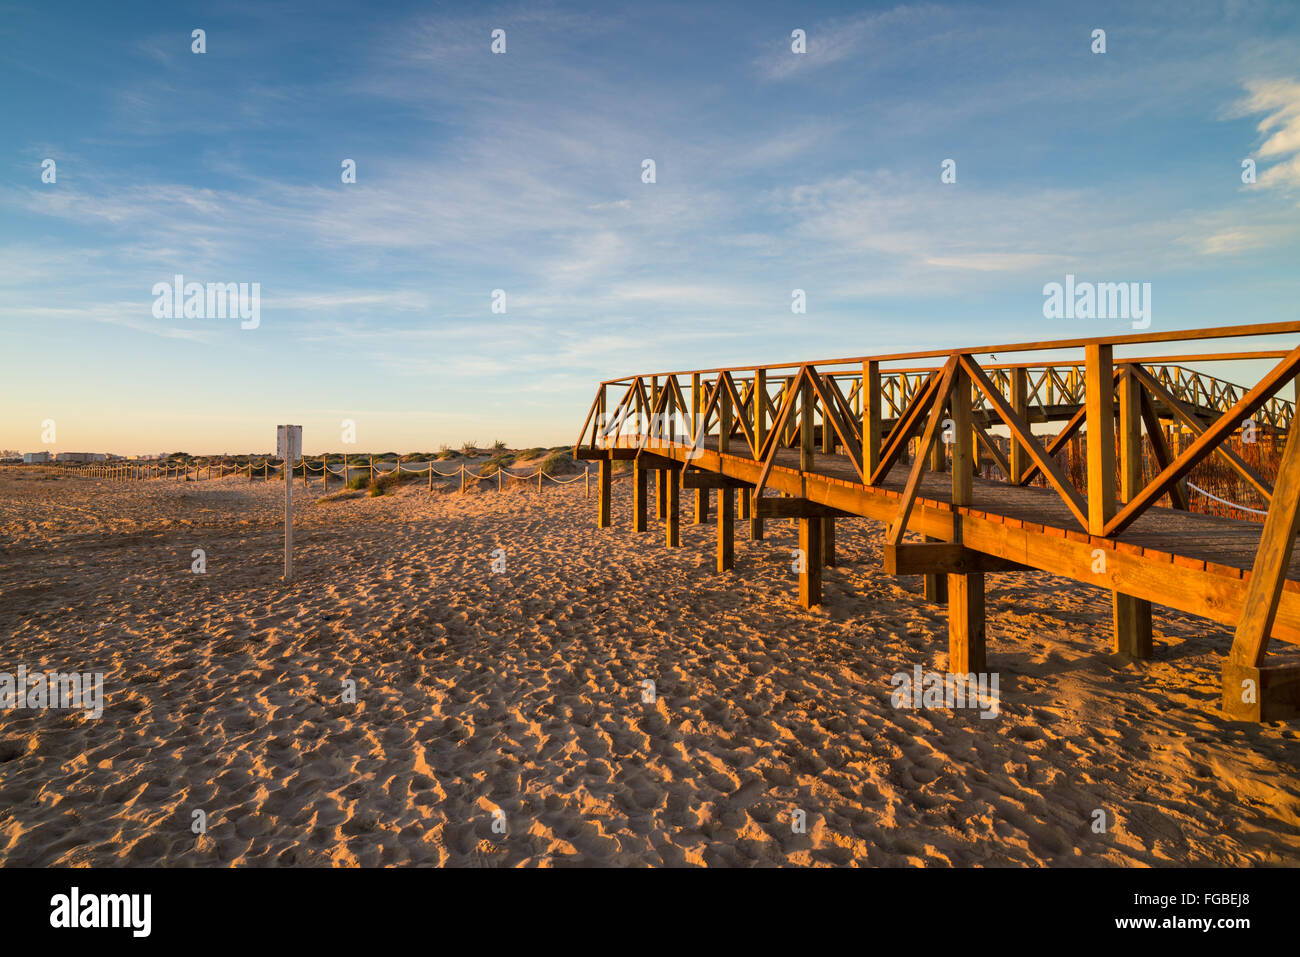 Guardamar beach with its walkways over protected dunes Stock Photo